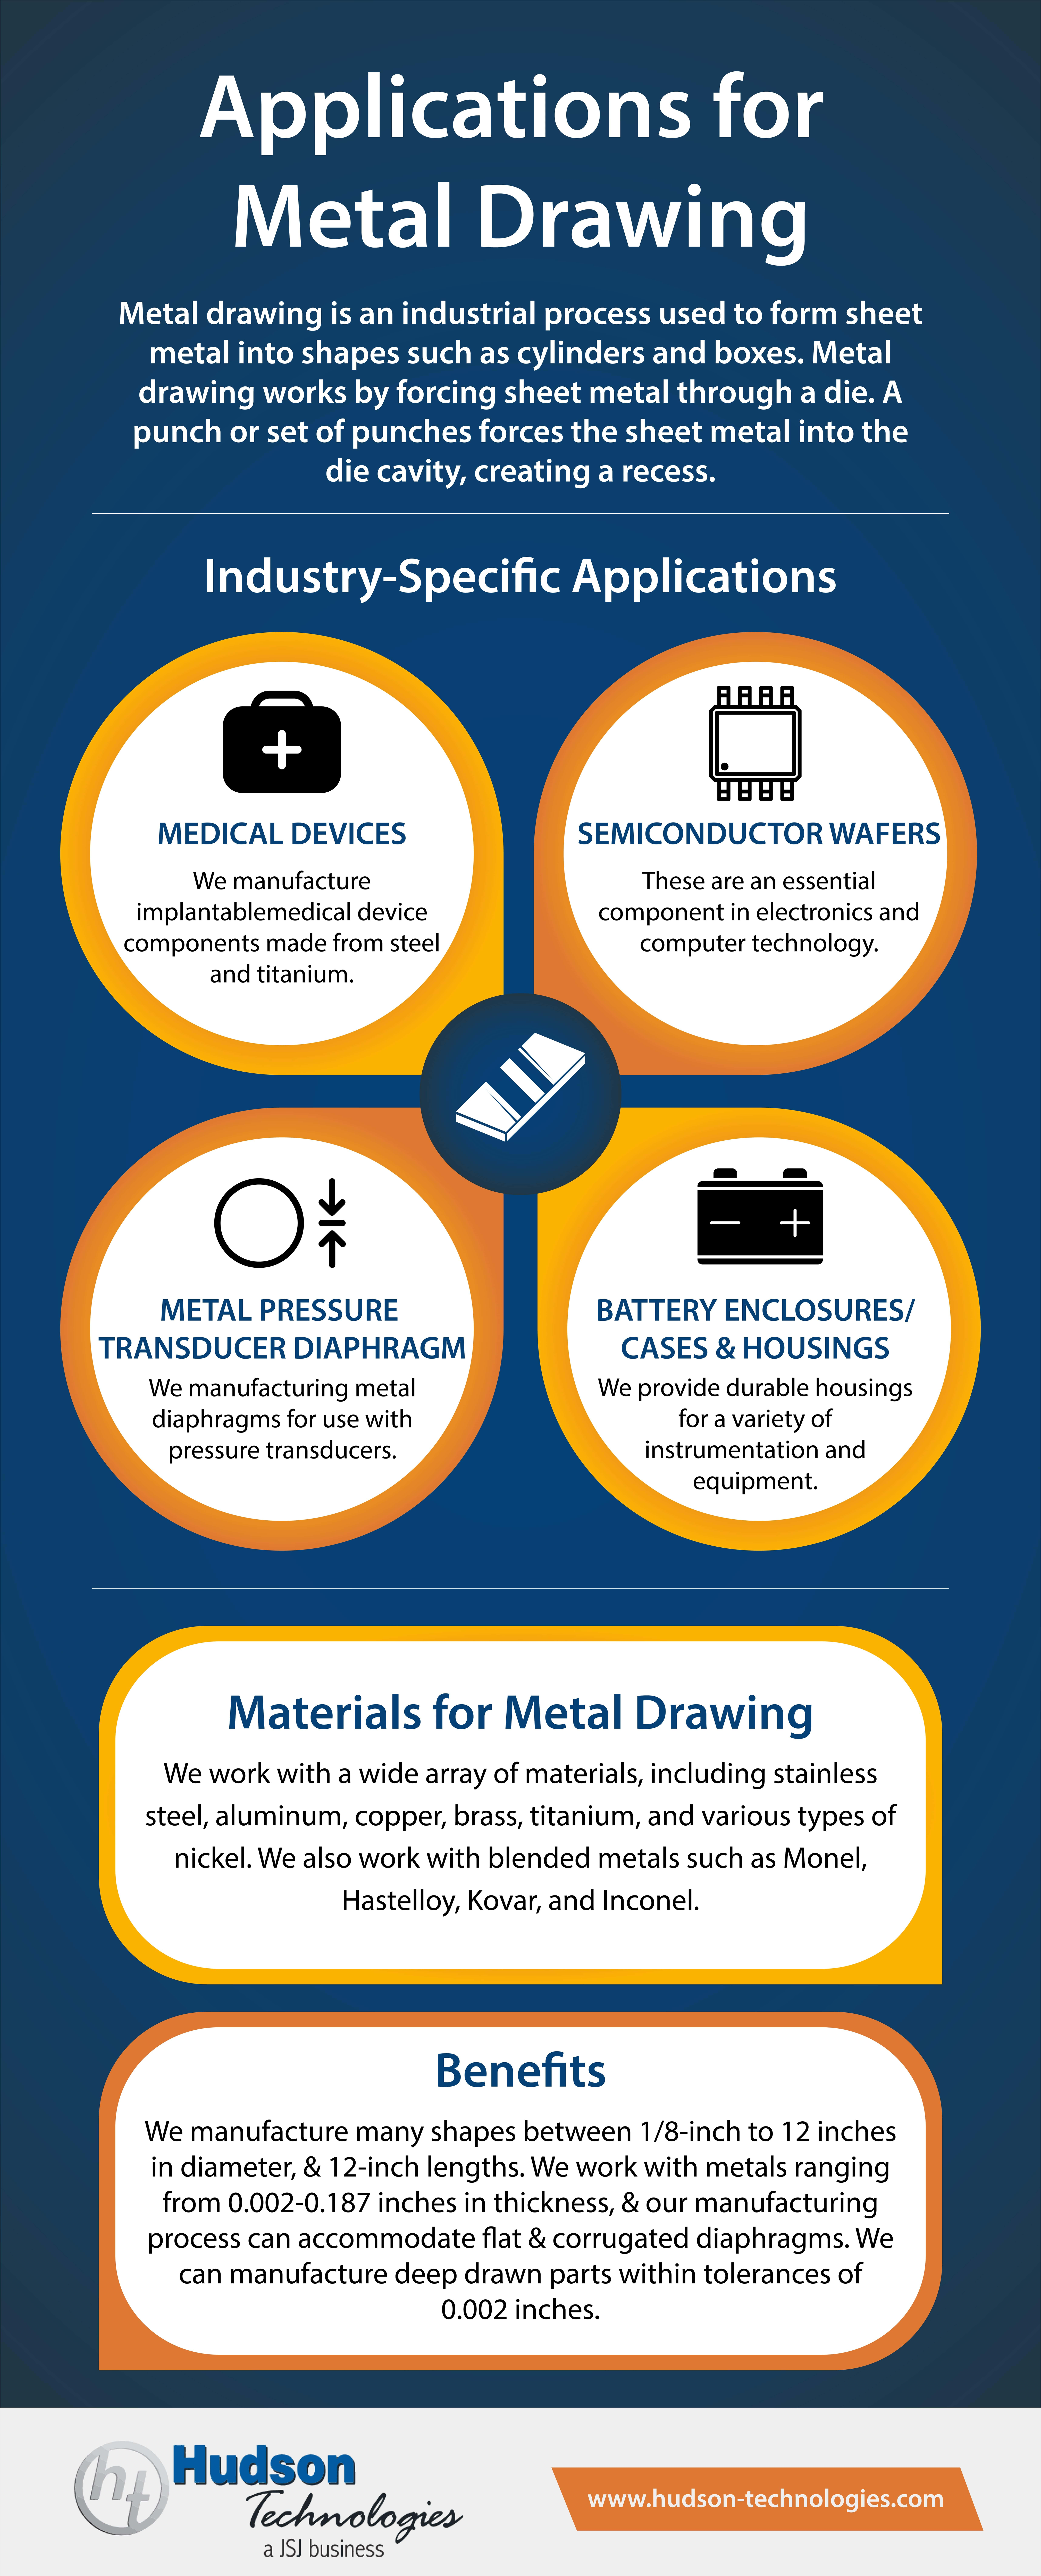 Applications for Metal Drawing